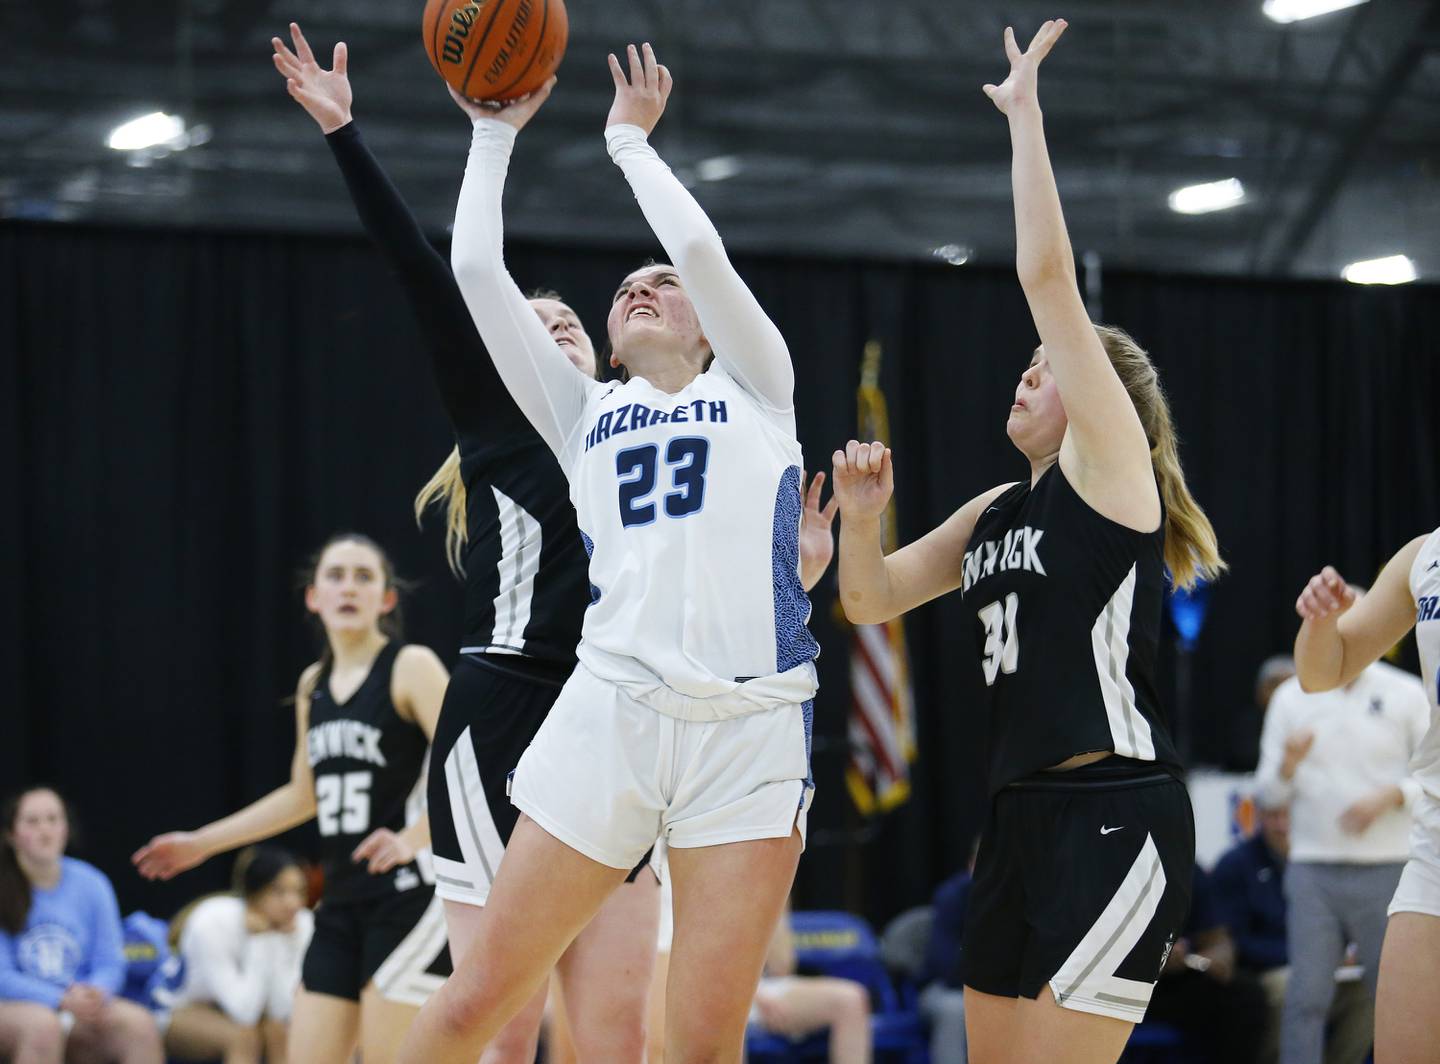 Nazareth's Danni Scully takes a shot during the girls IHSA 3A Supersectional basketball game between Nazareth Academy and Fenwick High School on Monday, February 28, 2022 at De La Salle High School in Chicago.